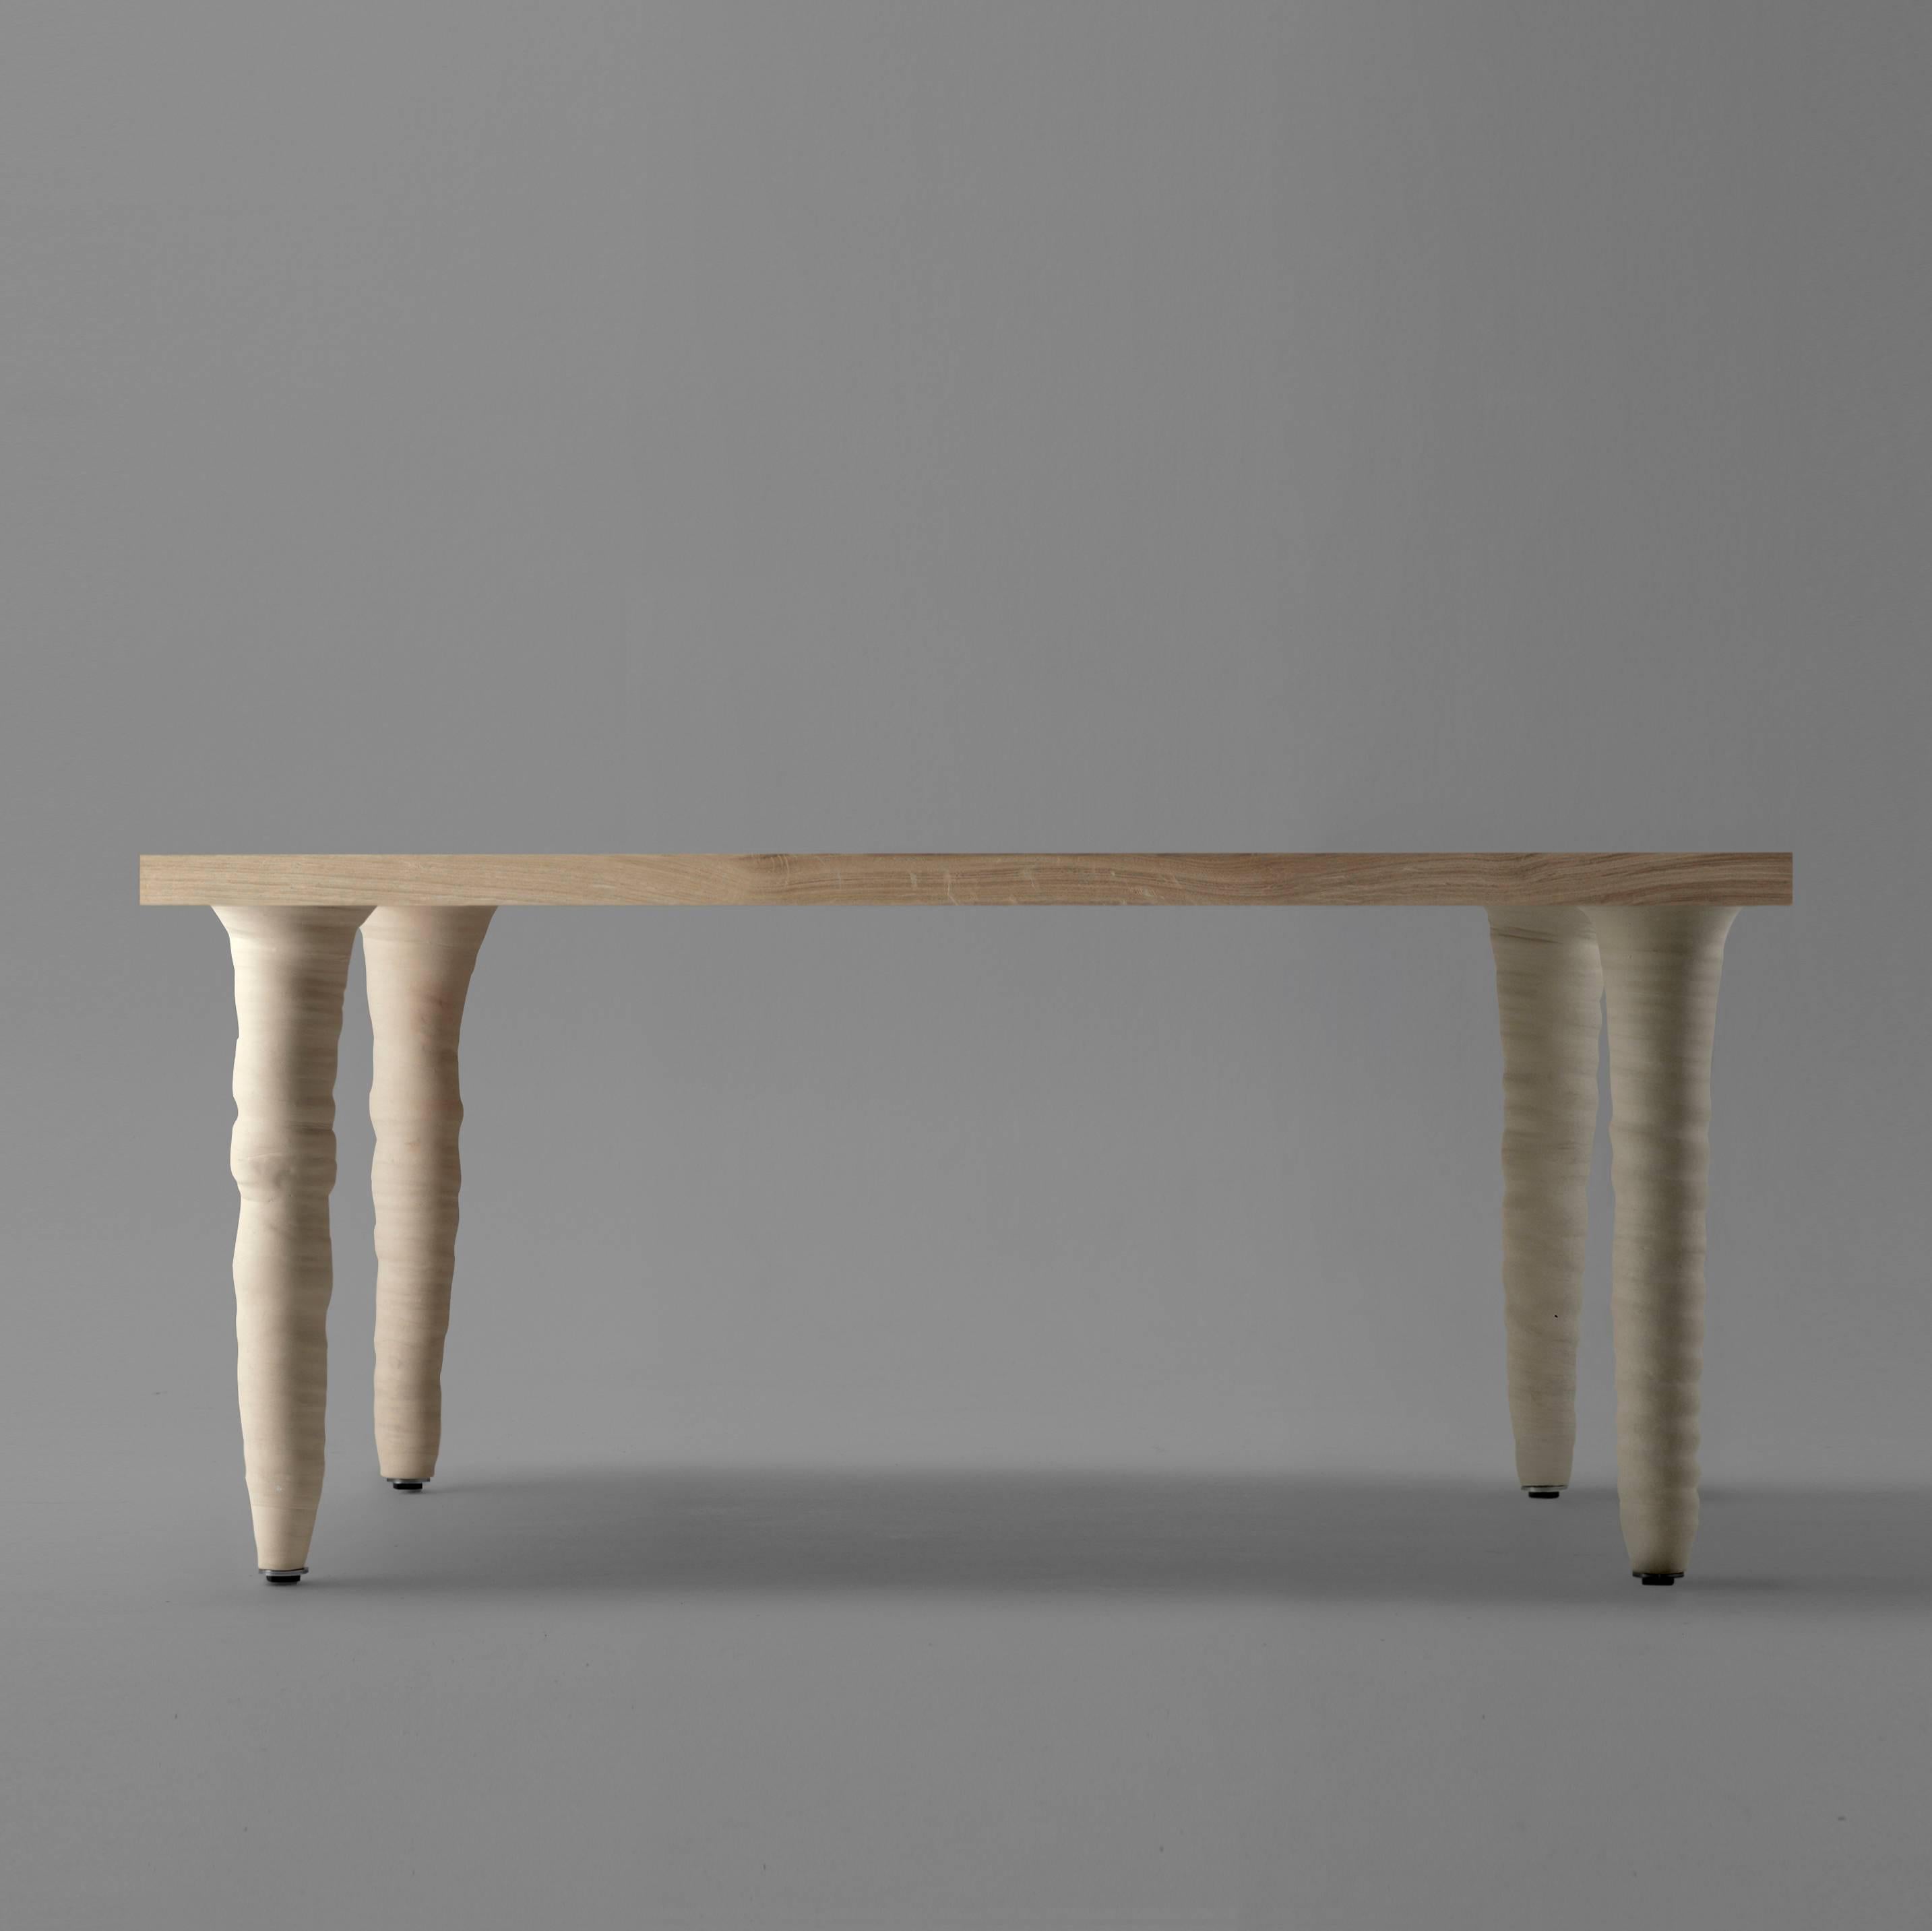 The fang table is a table with legs made of porcelain stoneware.
The legs have been hand turned. The legs are always purposefully different and imperfect. 

Xavier Mañosa
(Barcelona, 1981) potter, artist and designer.
He inherited the artisanal